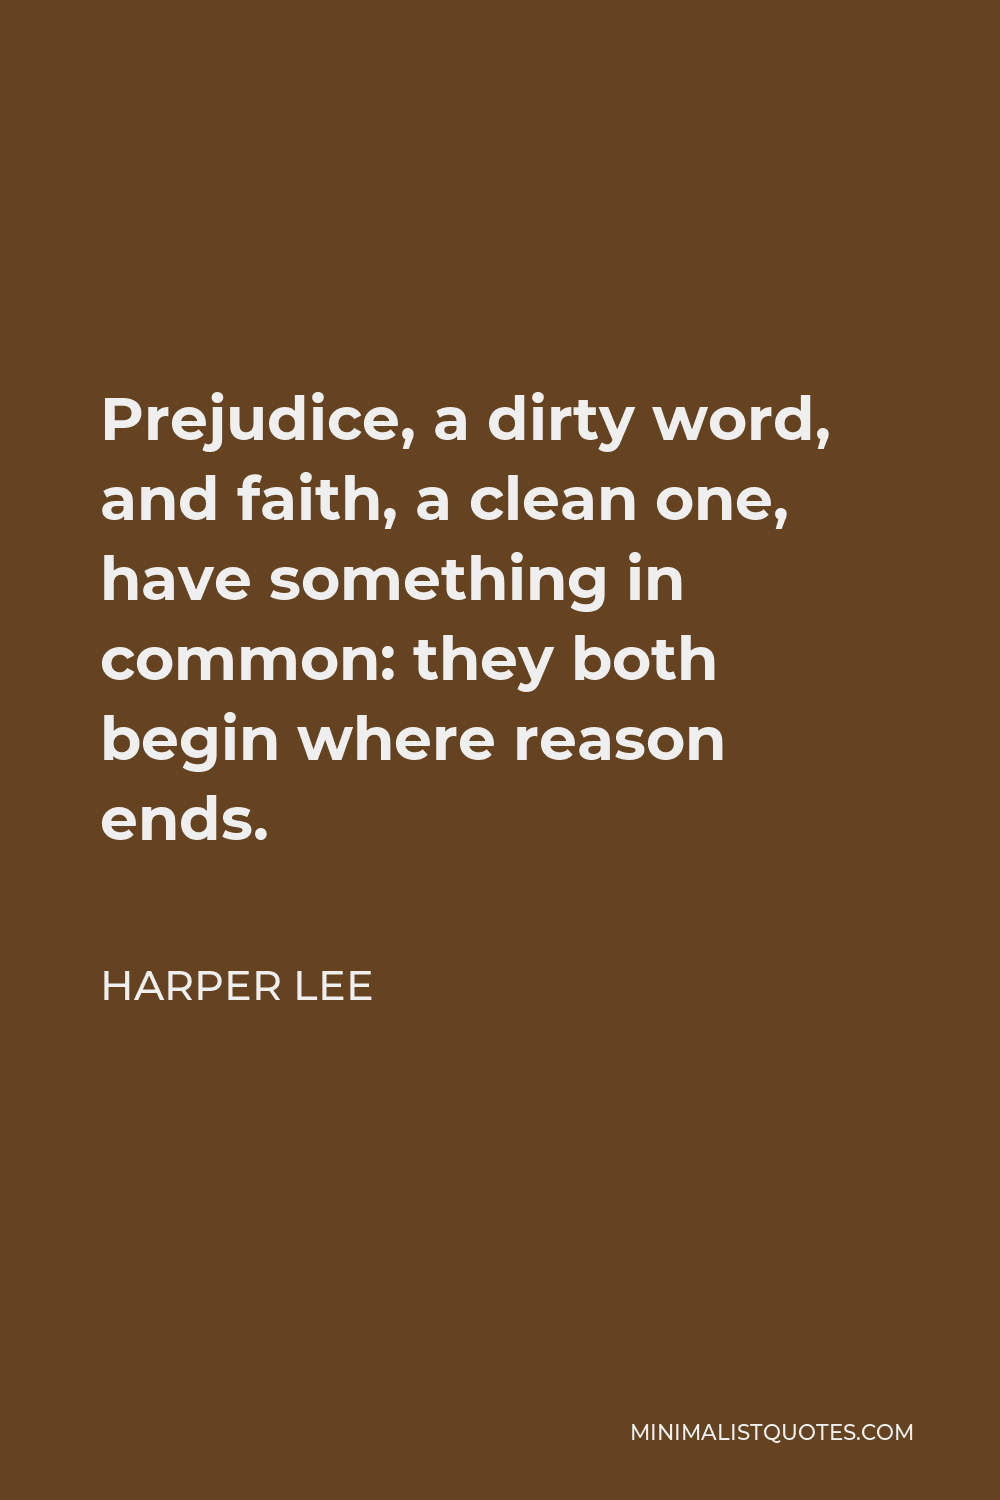 Harper Lee Quote - Prejudice, a dirty word, and faith, a clean one, have something in common: they both begin where reason ends.